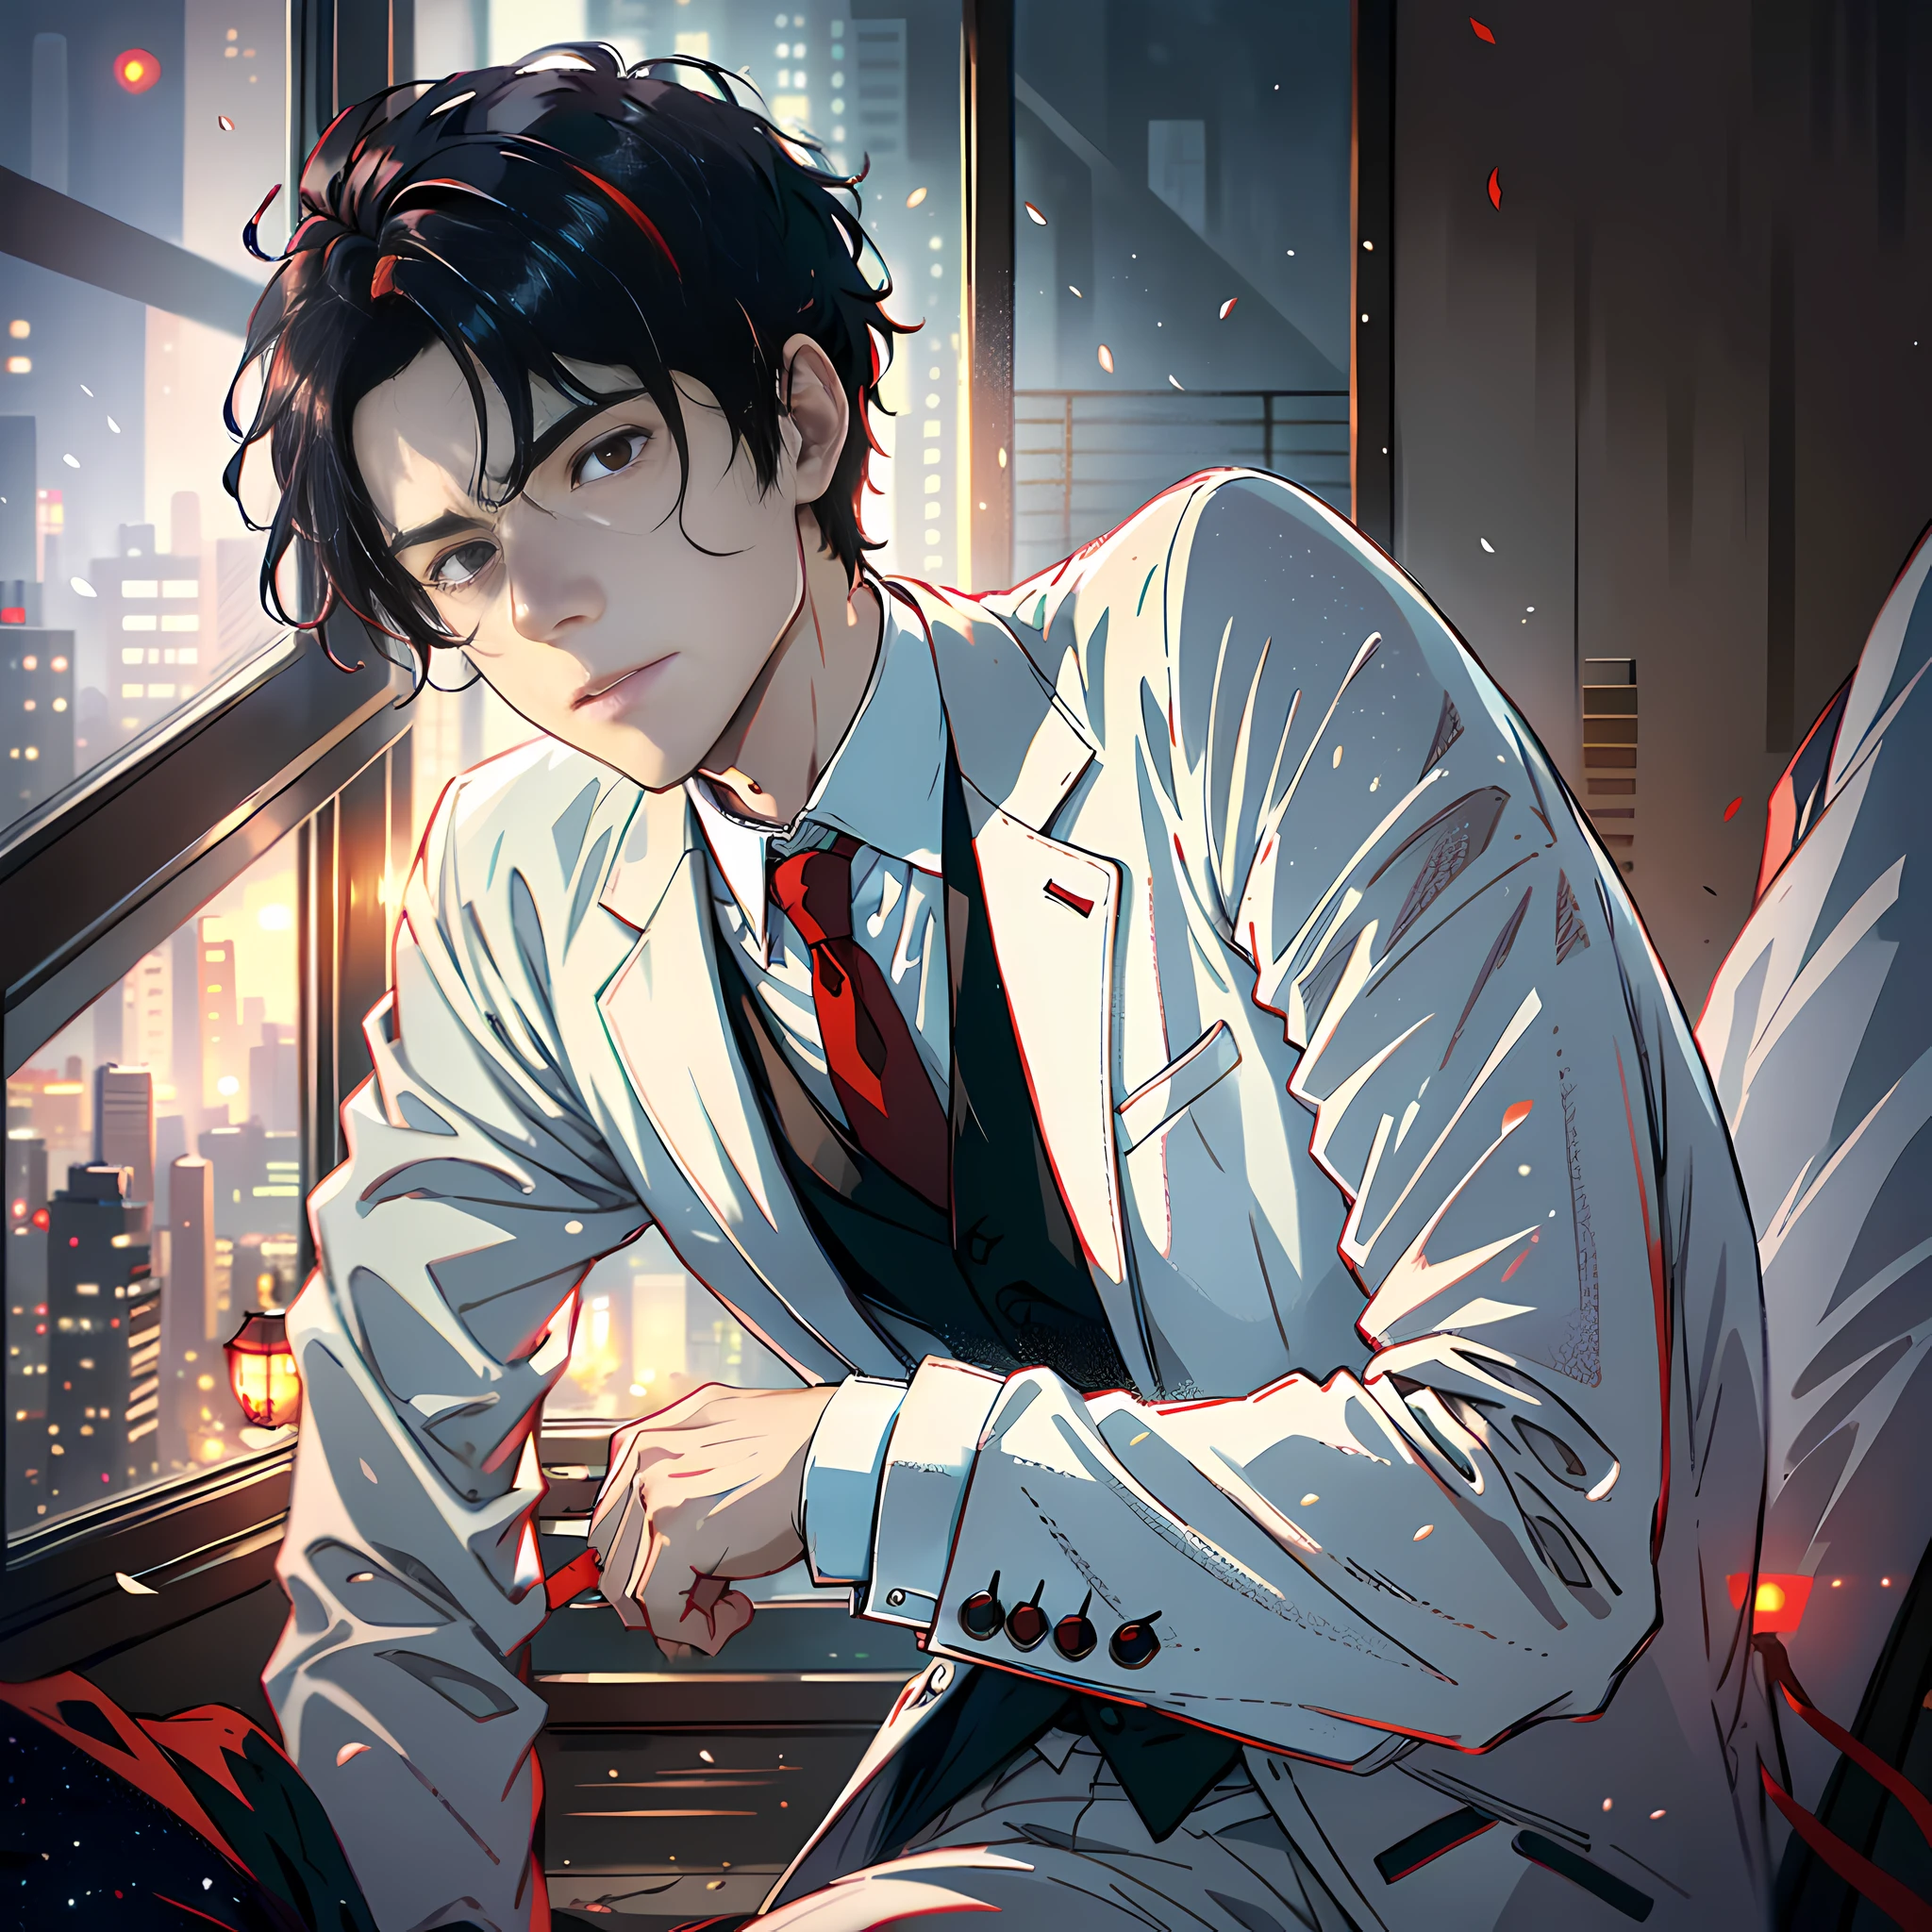 At night, by the window, Red Moon, a handsome man lying flat on the ground, uncomfortable, short black hair, white suit, sides, face hyper-detailed, no blood, highly real, 4K, chiaroscuro, ultra-high detail